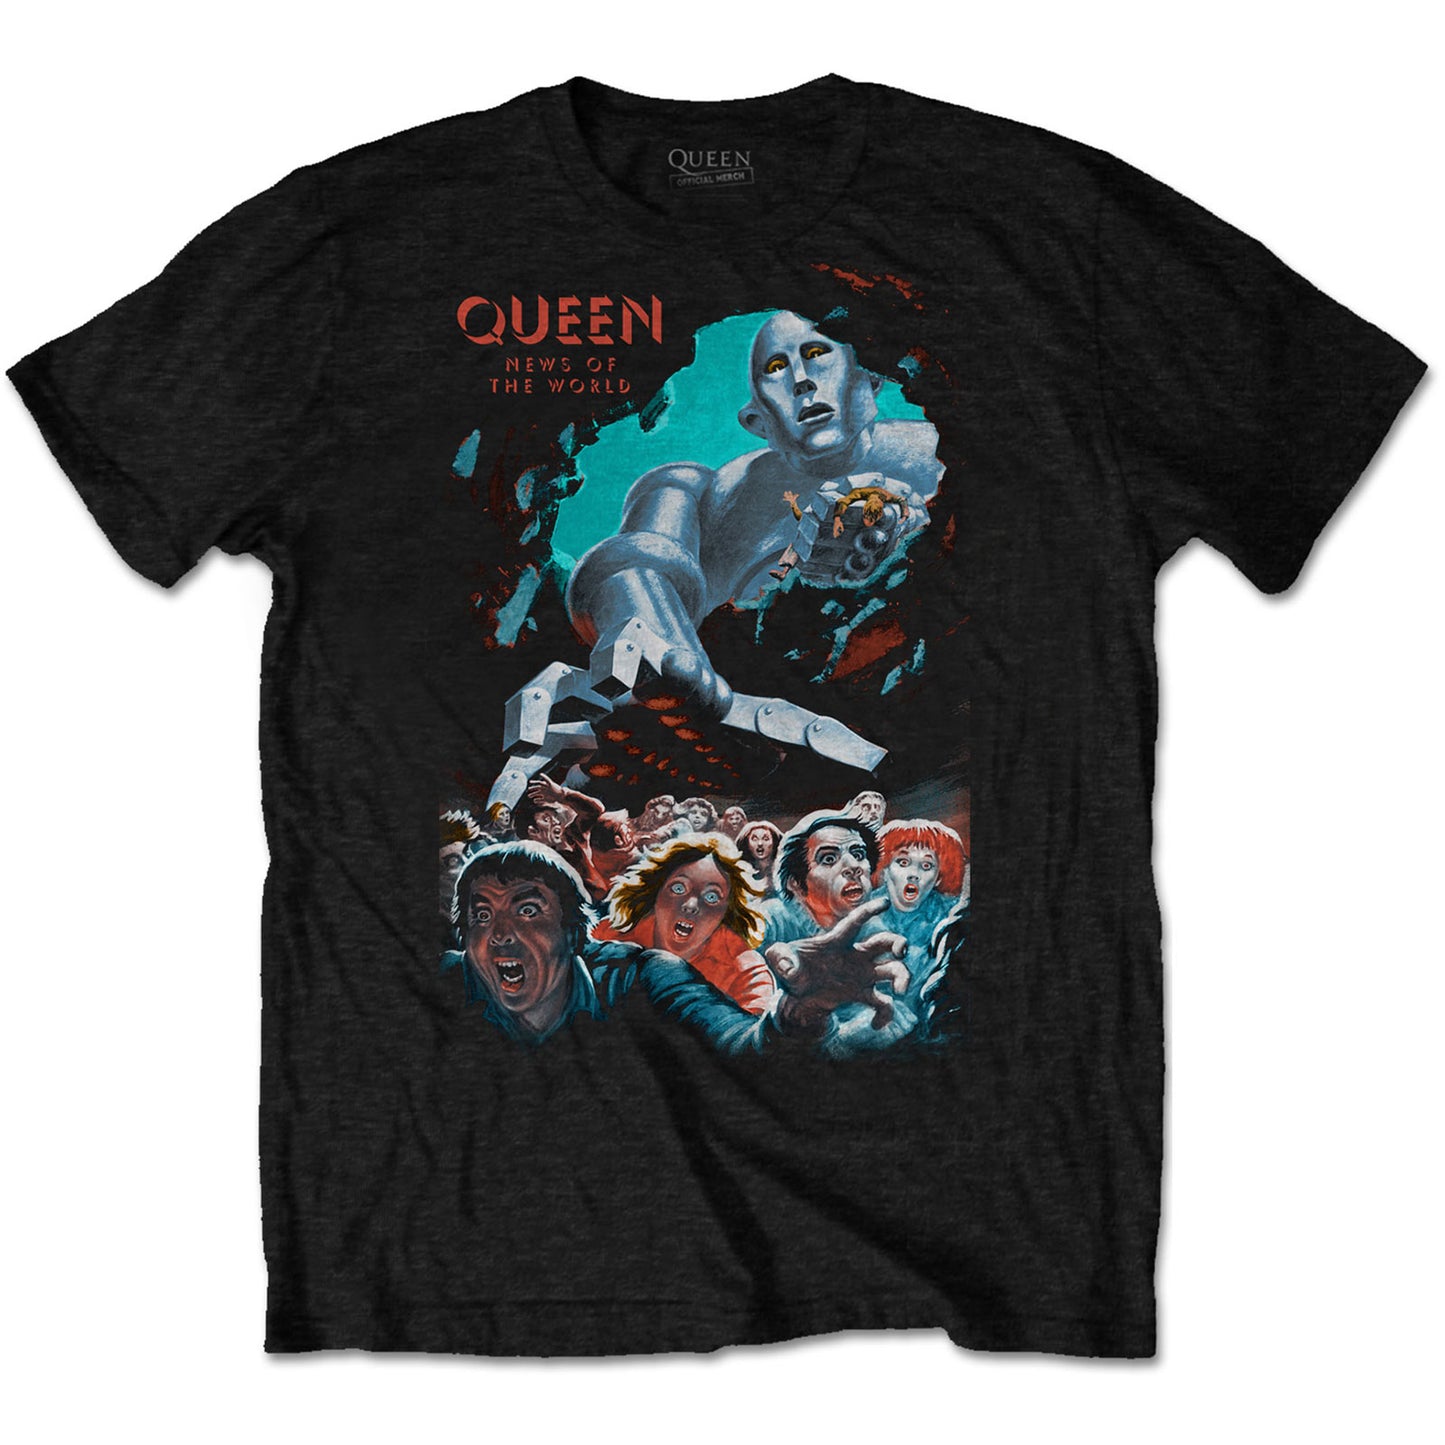 QUEEN UNISEX T-SHIRT: NEWS OF THE WORLD VINTAGE